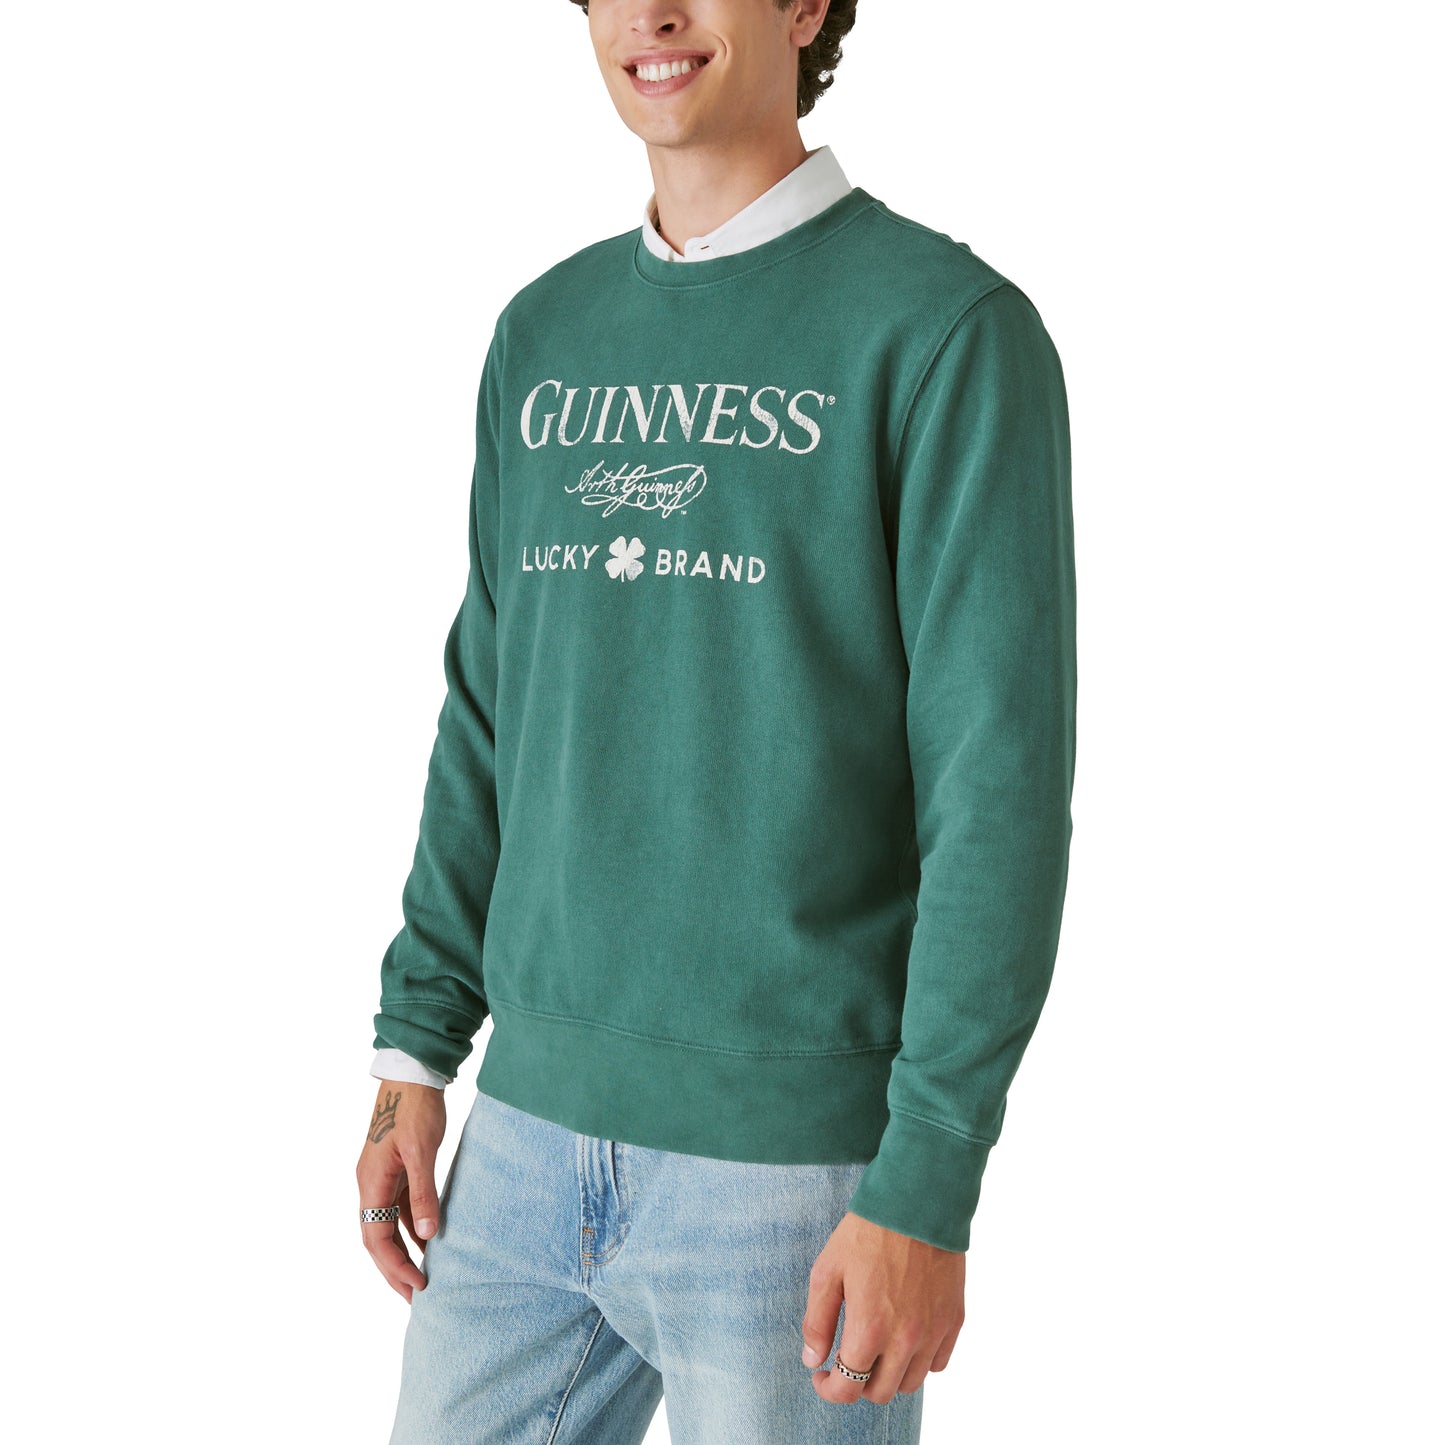 Limited edition Guinness Fleece Logo Crewneck - green with Guinness logo. (Available at Guinness Webstore US)